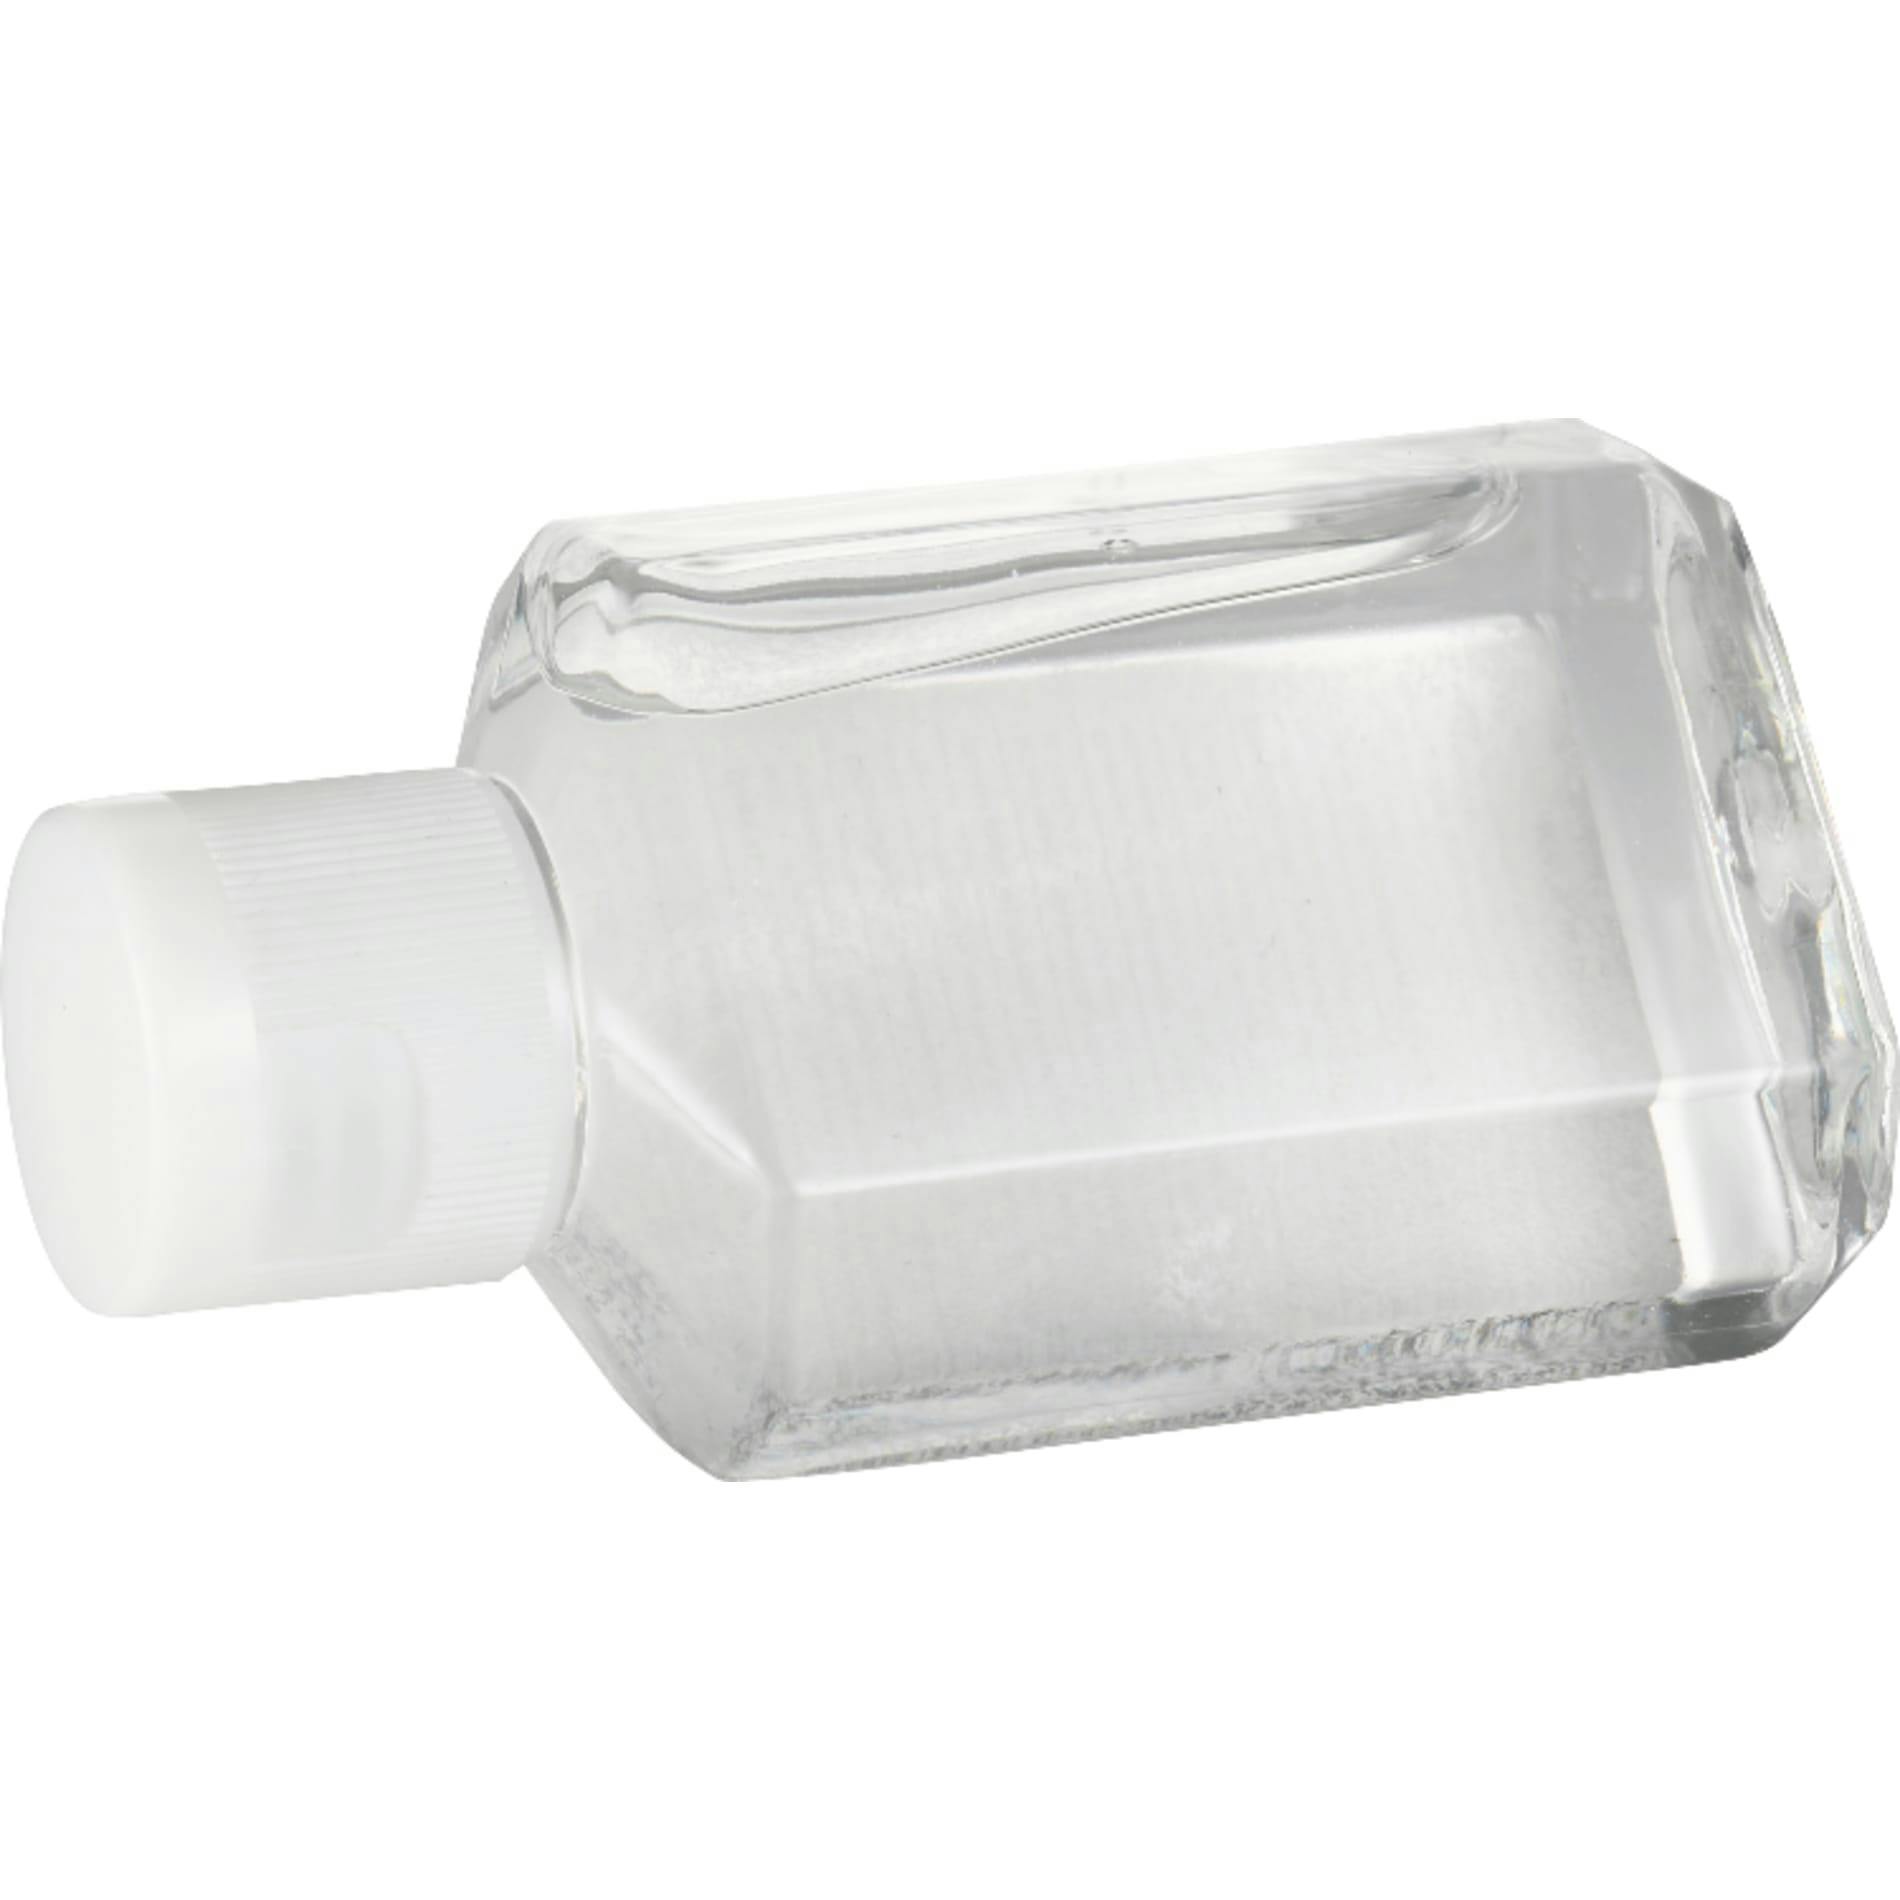 2oz Squirt Hand Sanitizer - additional Image 2